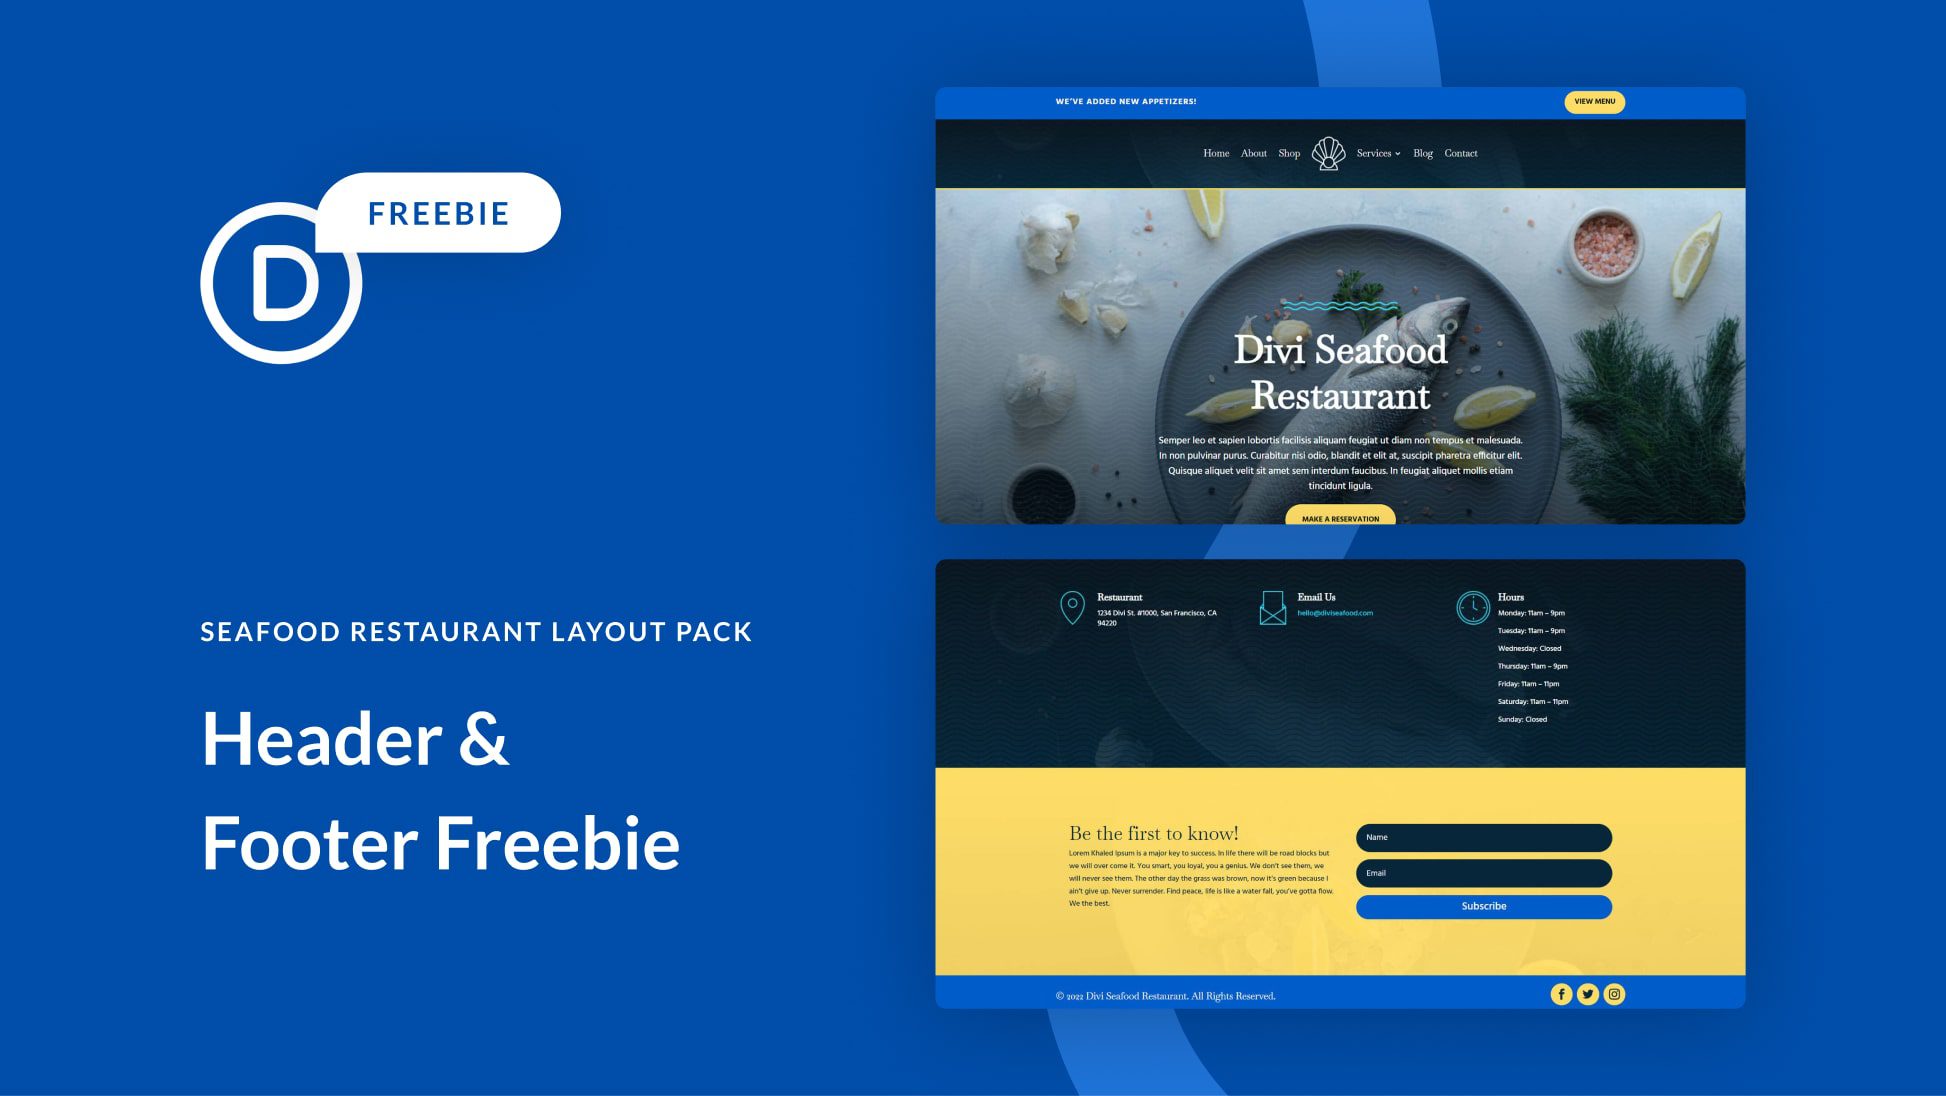 Download a FREE Header & Footer for Divi’s Seafood Restaurant Layout Pack